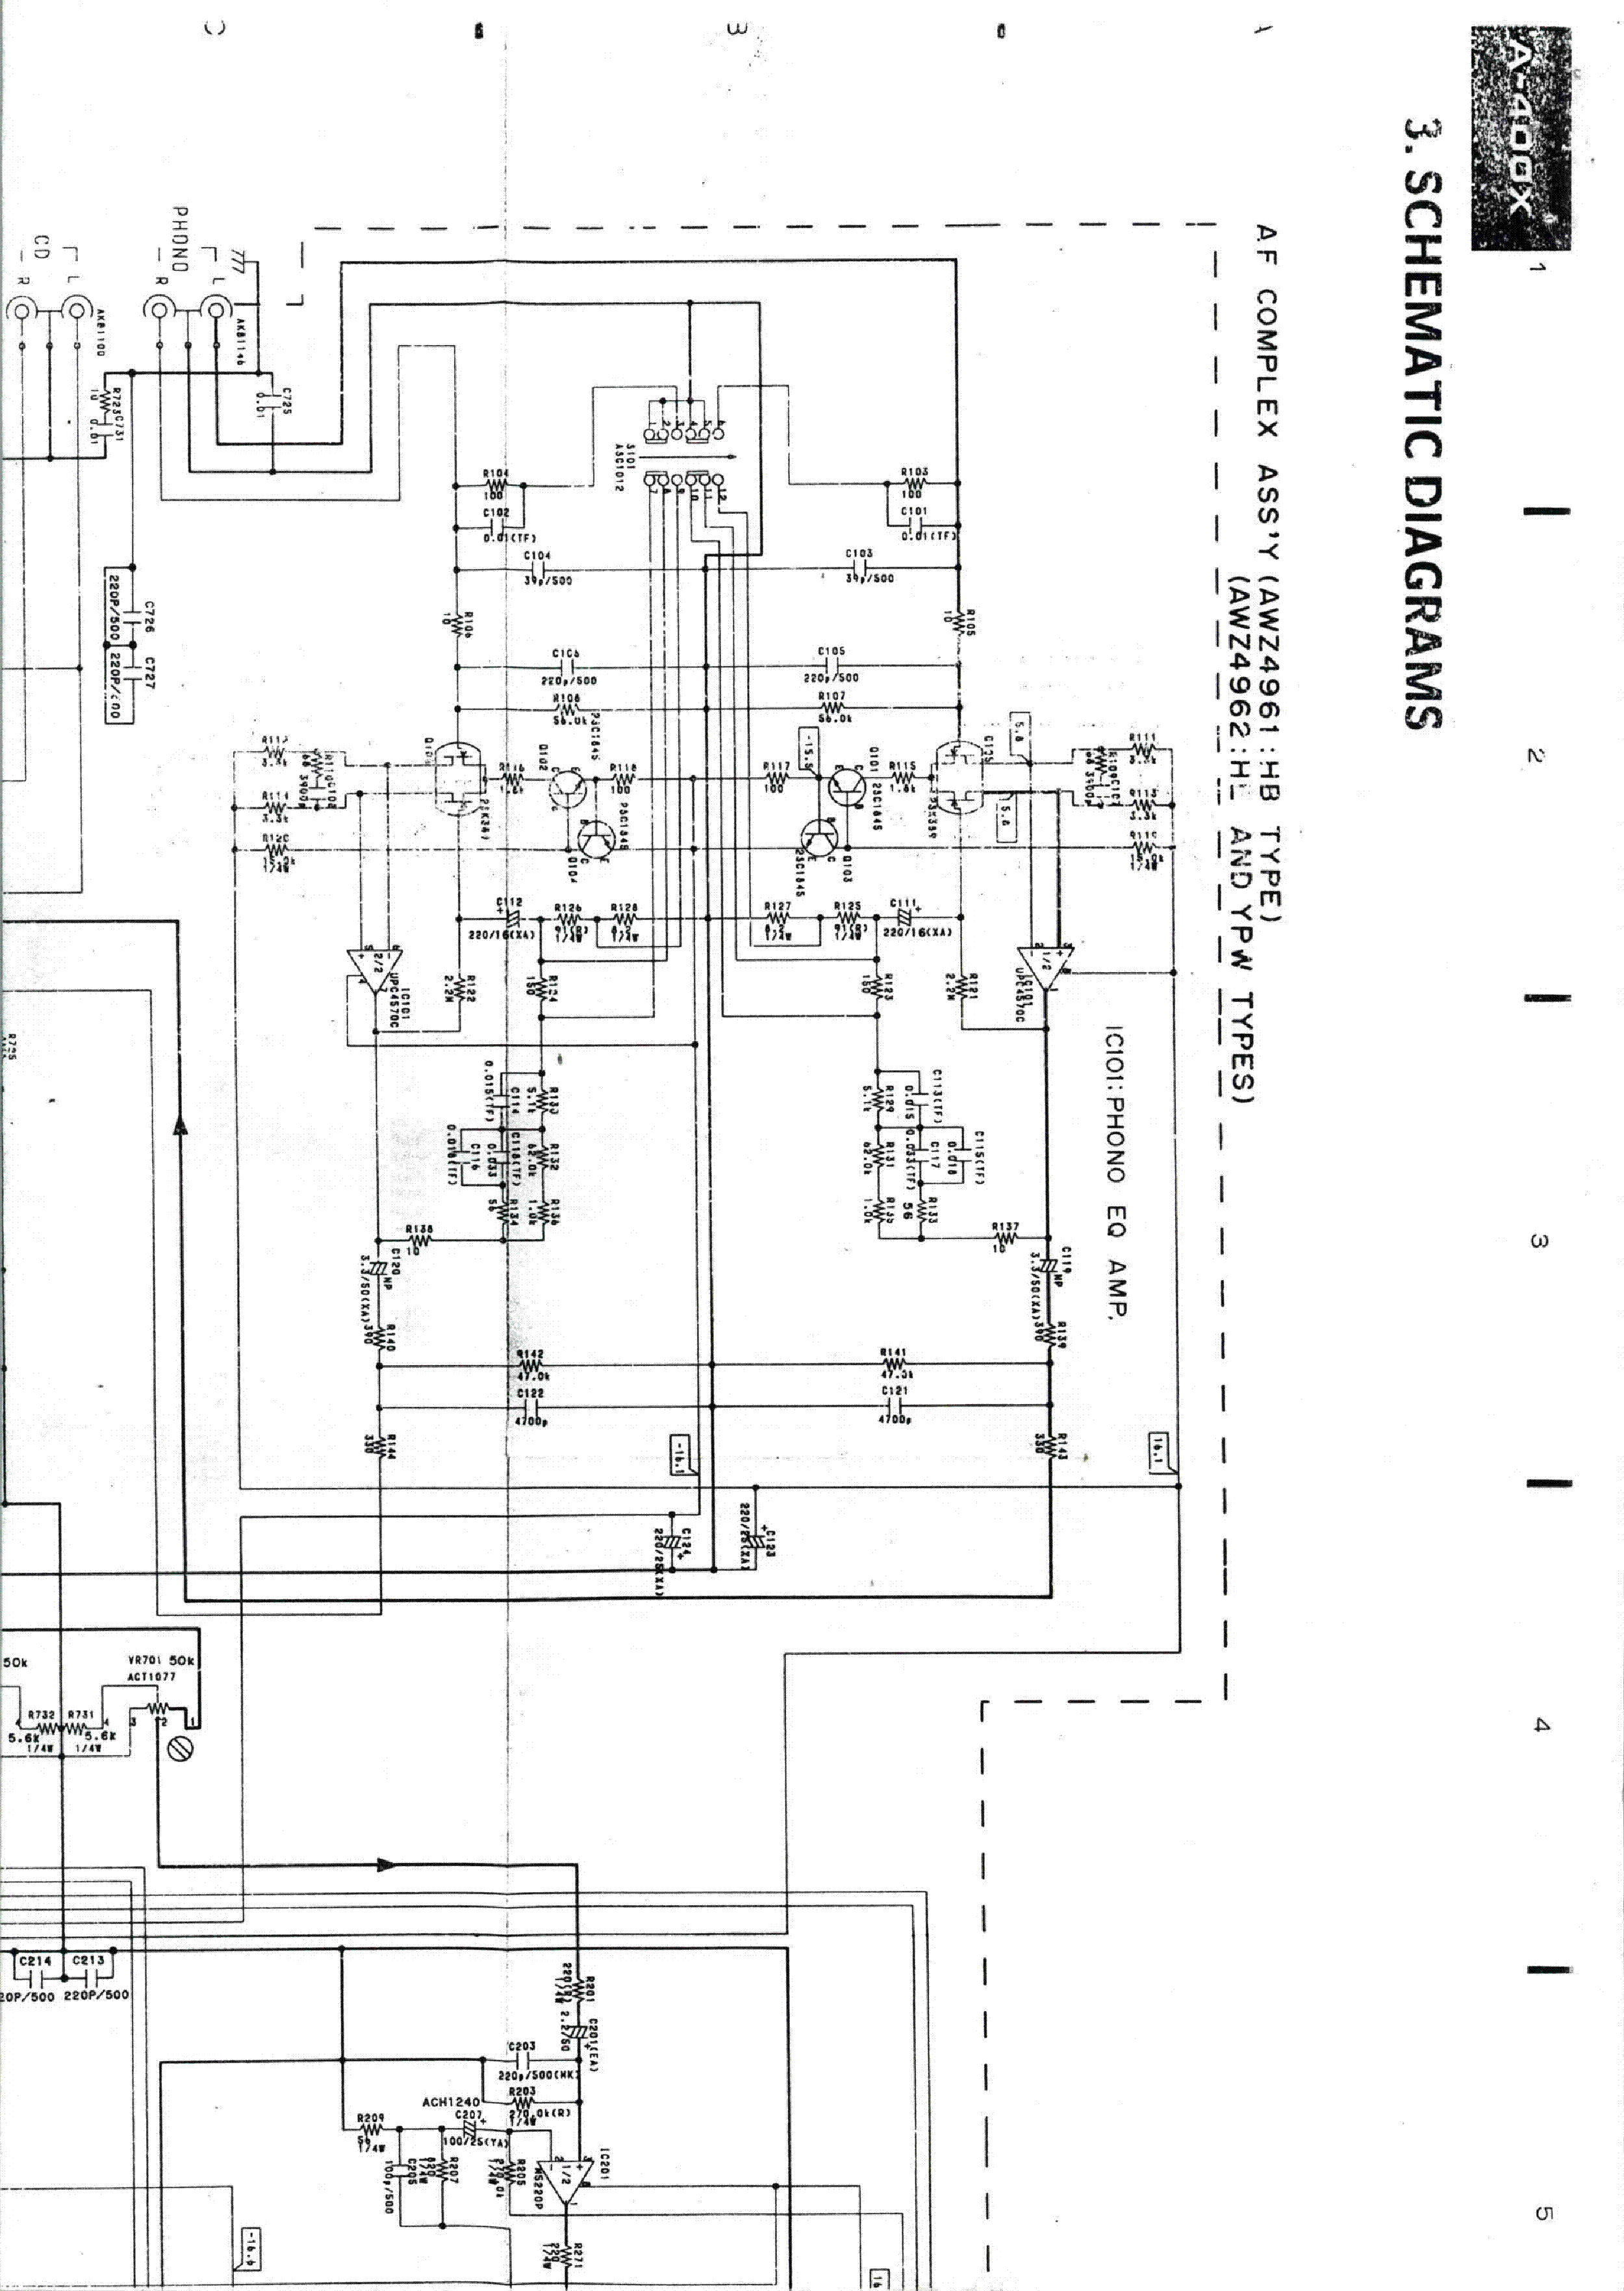 PIONEER A-400,400X service manual (2nd page)